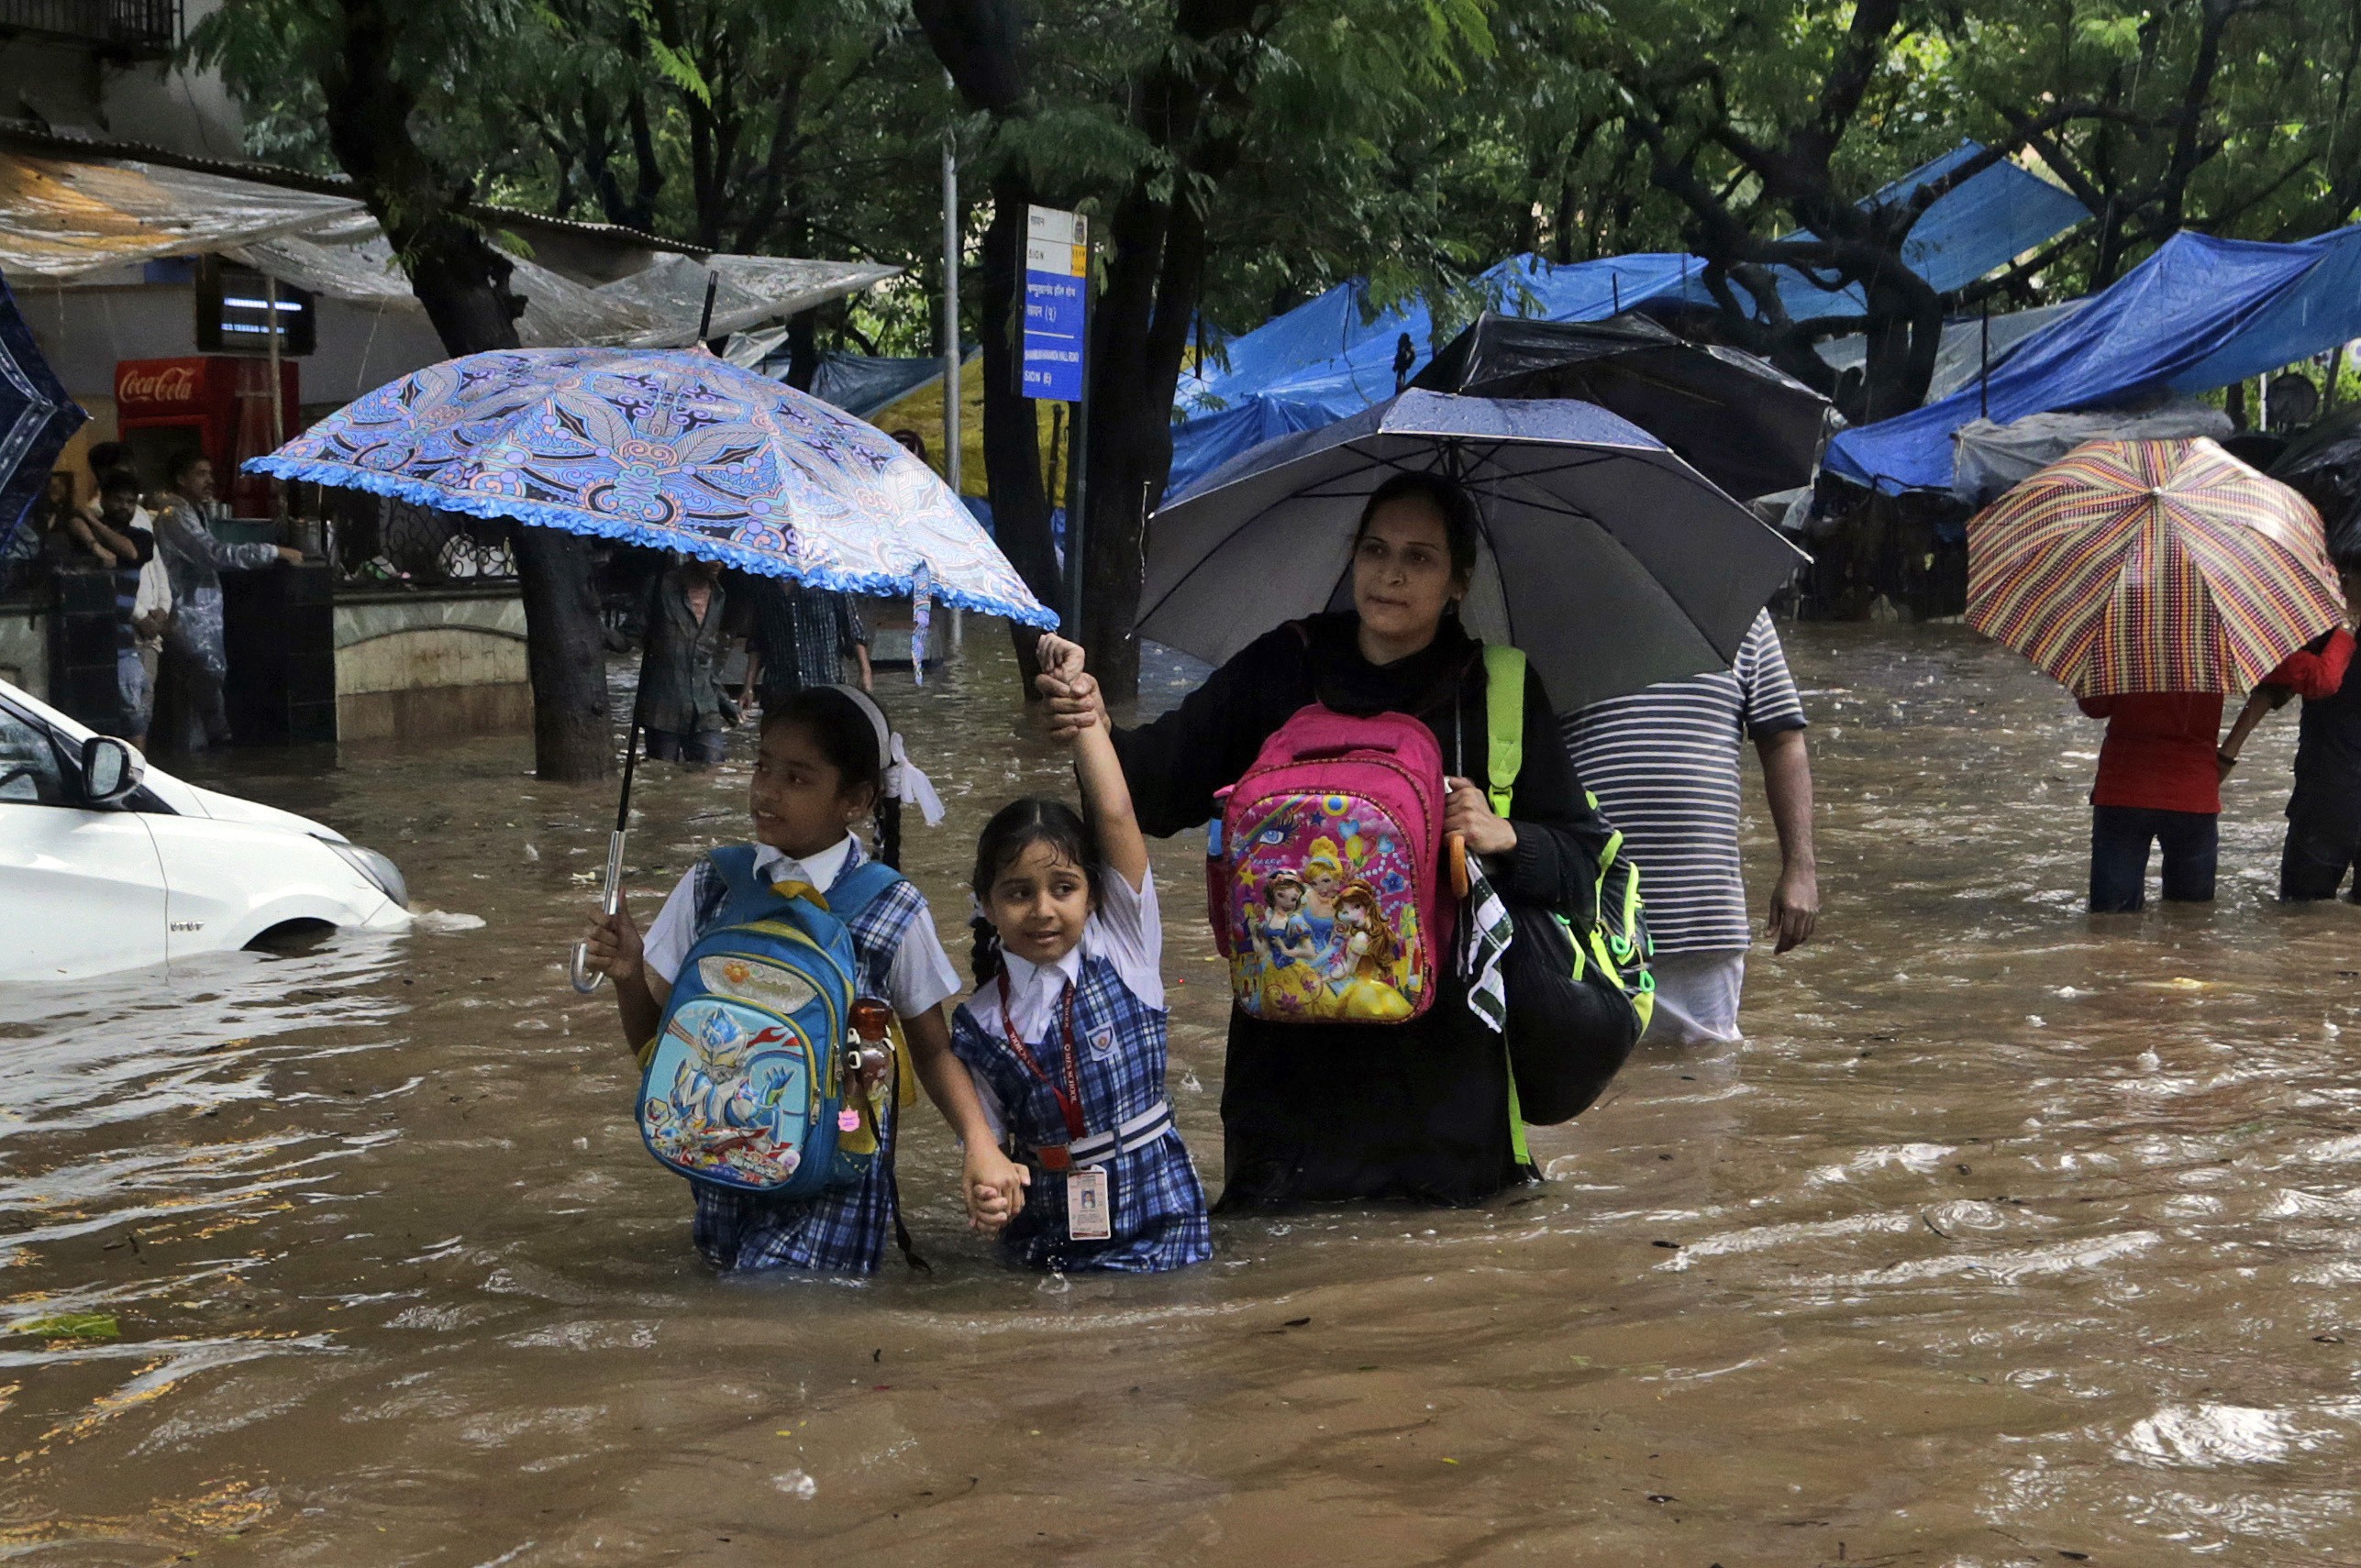 Families wade through floods in Mumbai on August 29. Mumbai was especially hard hit, with water swamping offices, schools and roads, and some 60 people killed. Photo: AP